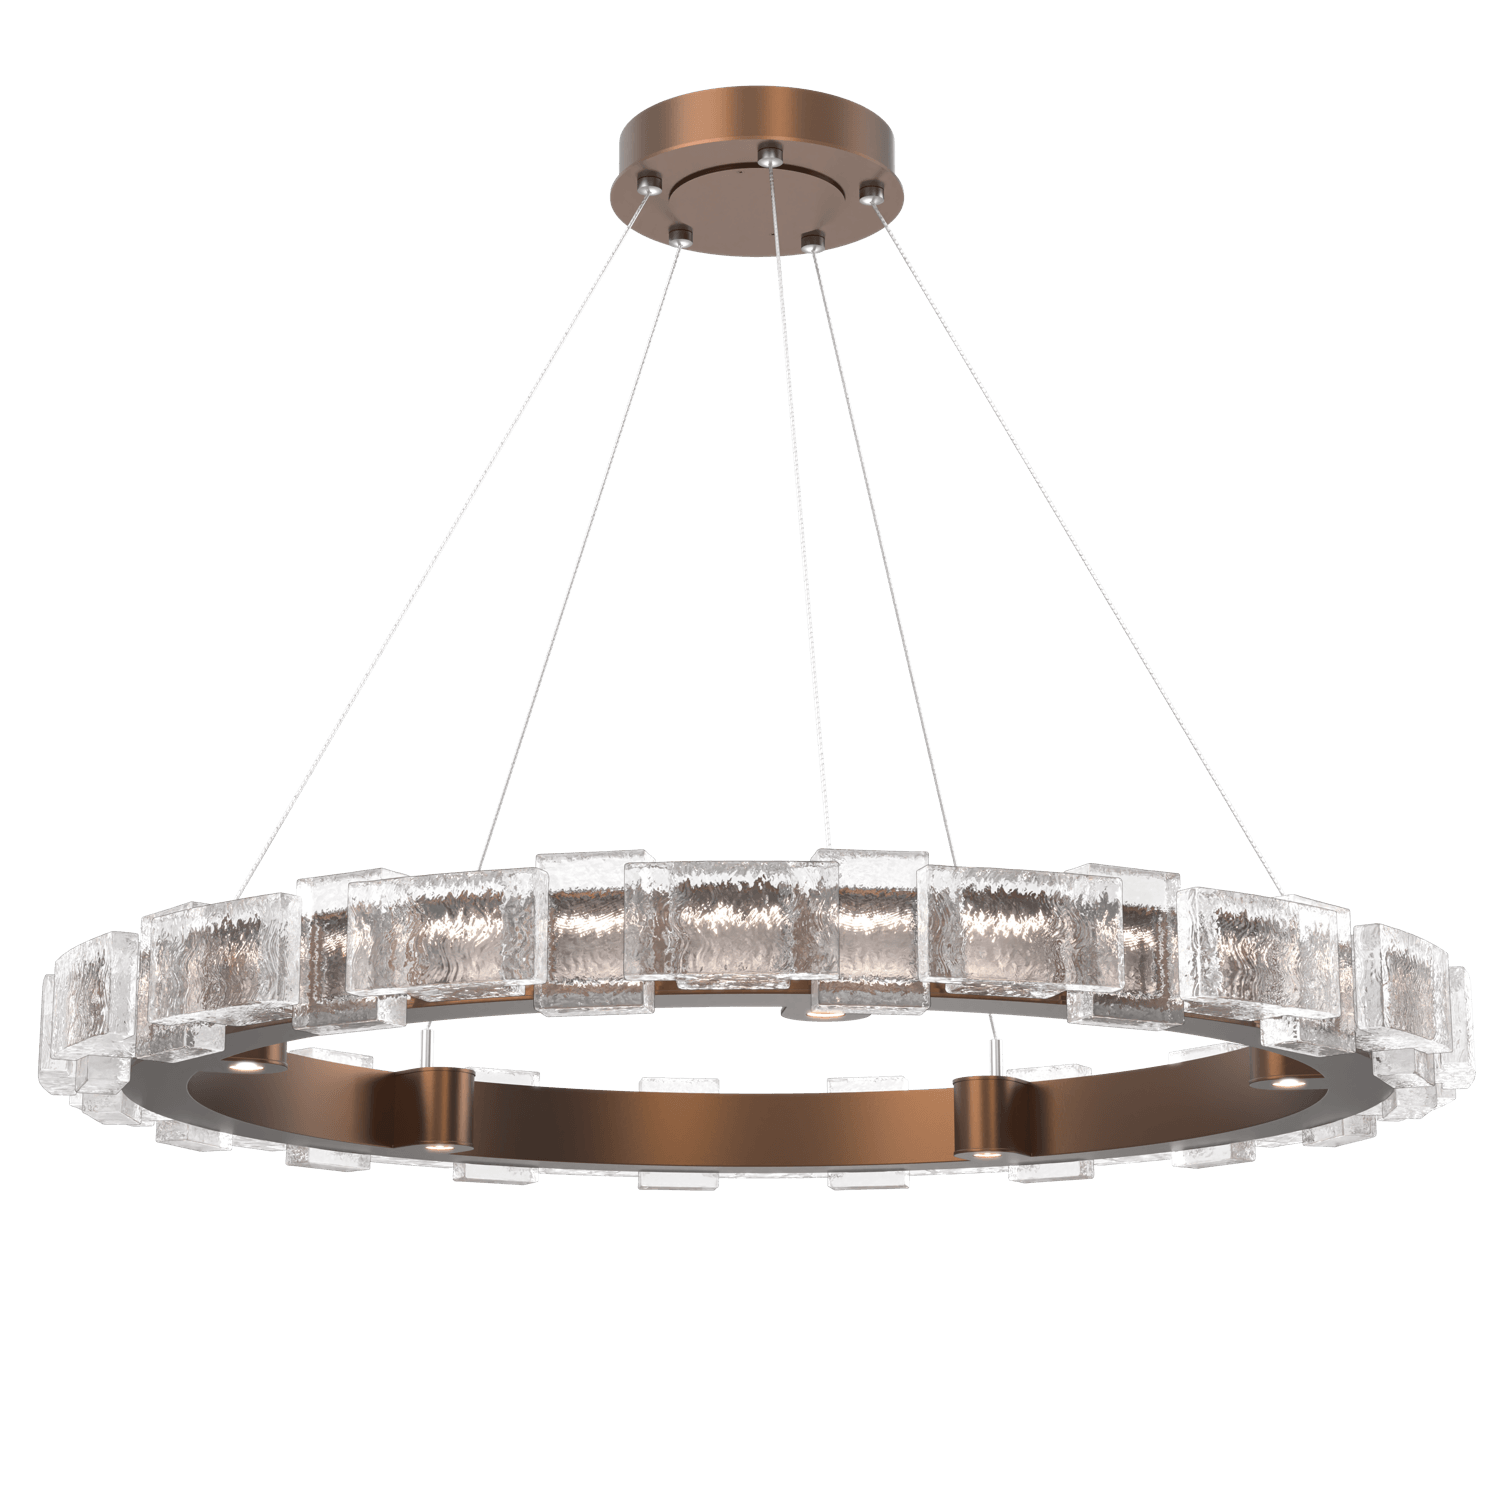 CHB0087-38-BB-TE-Hammerton-Studio-Tessera-38-inch-ring-chandelier-with-burnished-bronze-finish-and-clear-tetro-cast-glass-shade-and-LED-lamping